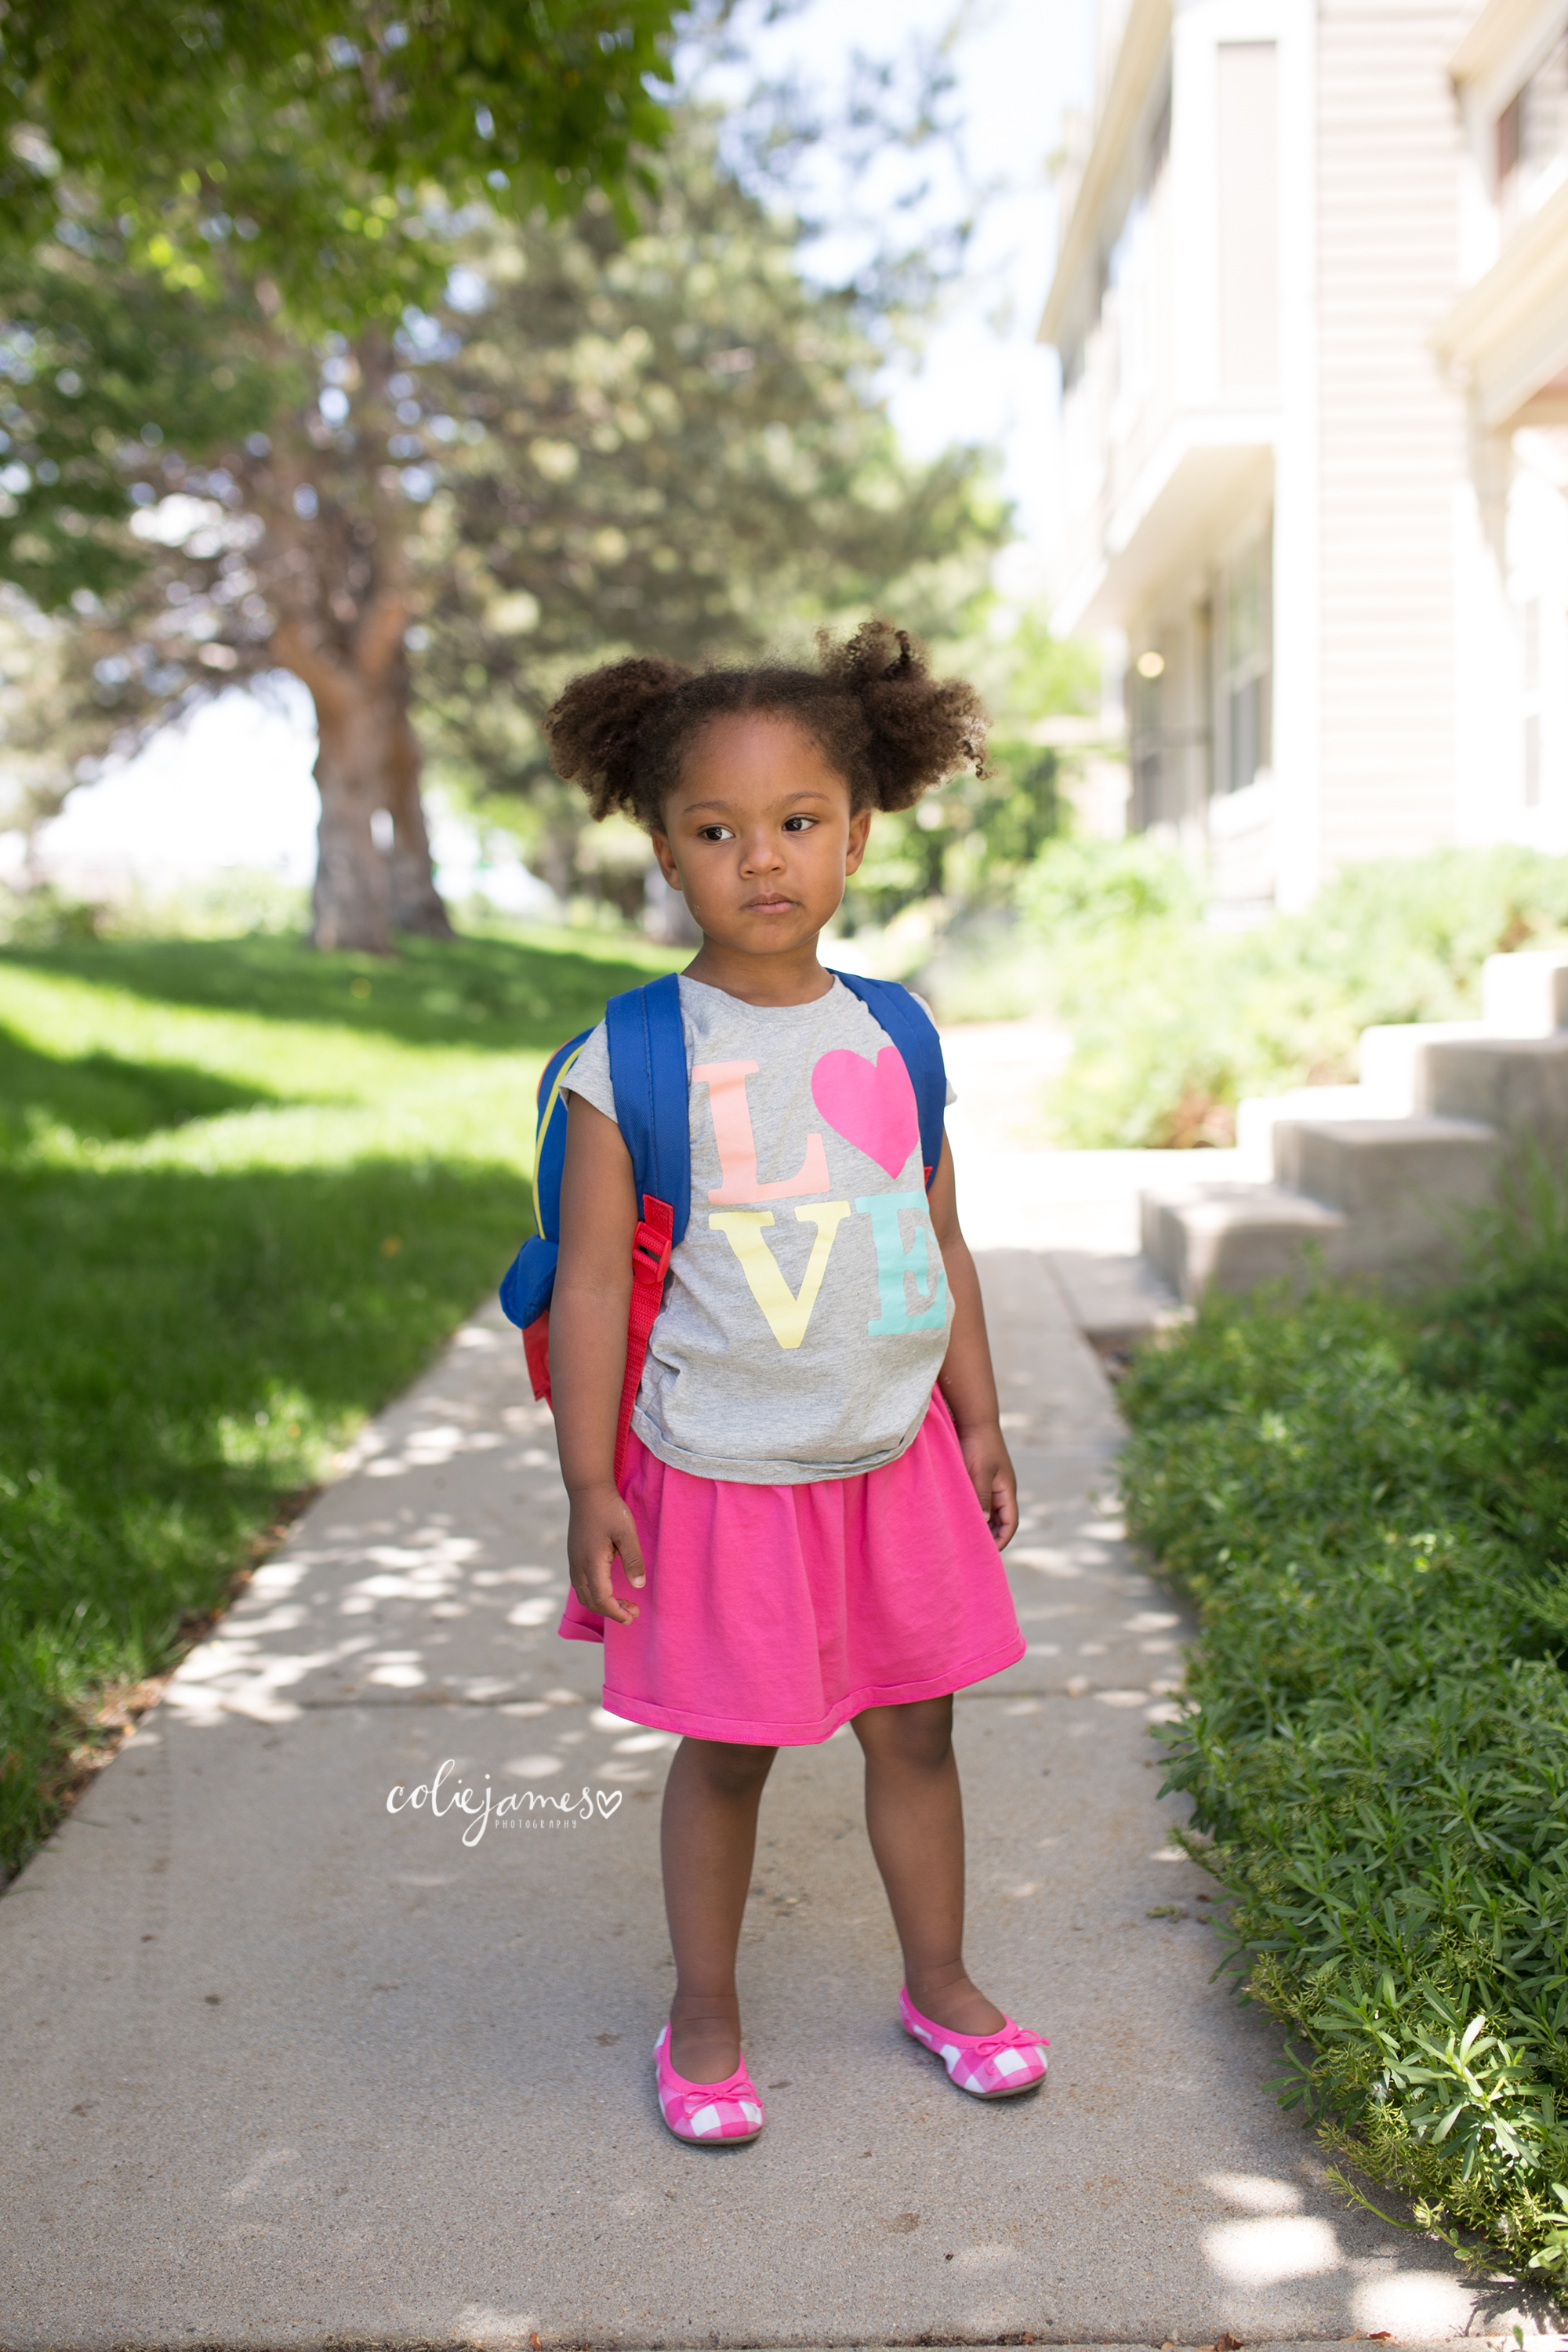 Boulder Lifestyle Photography Letter to Chloe 4